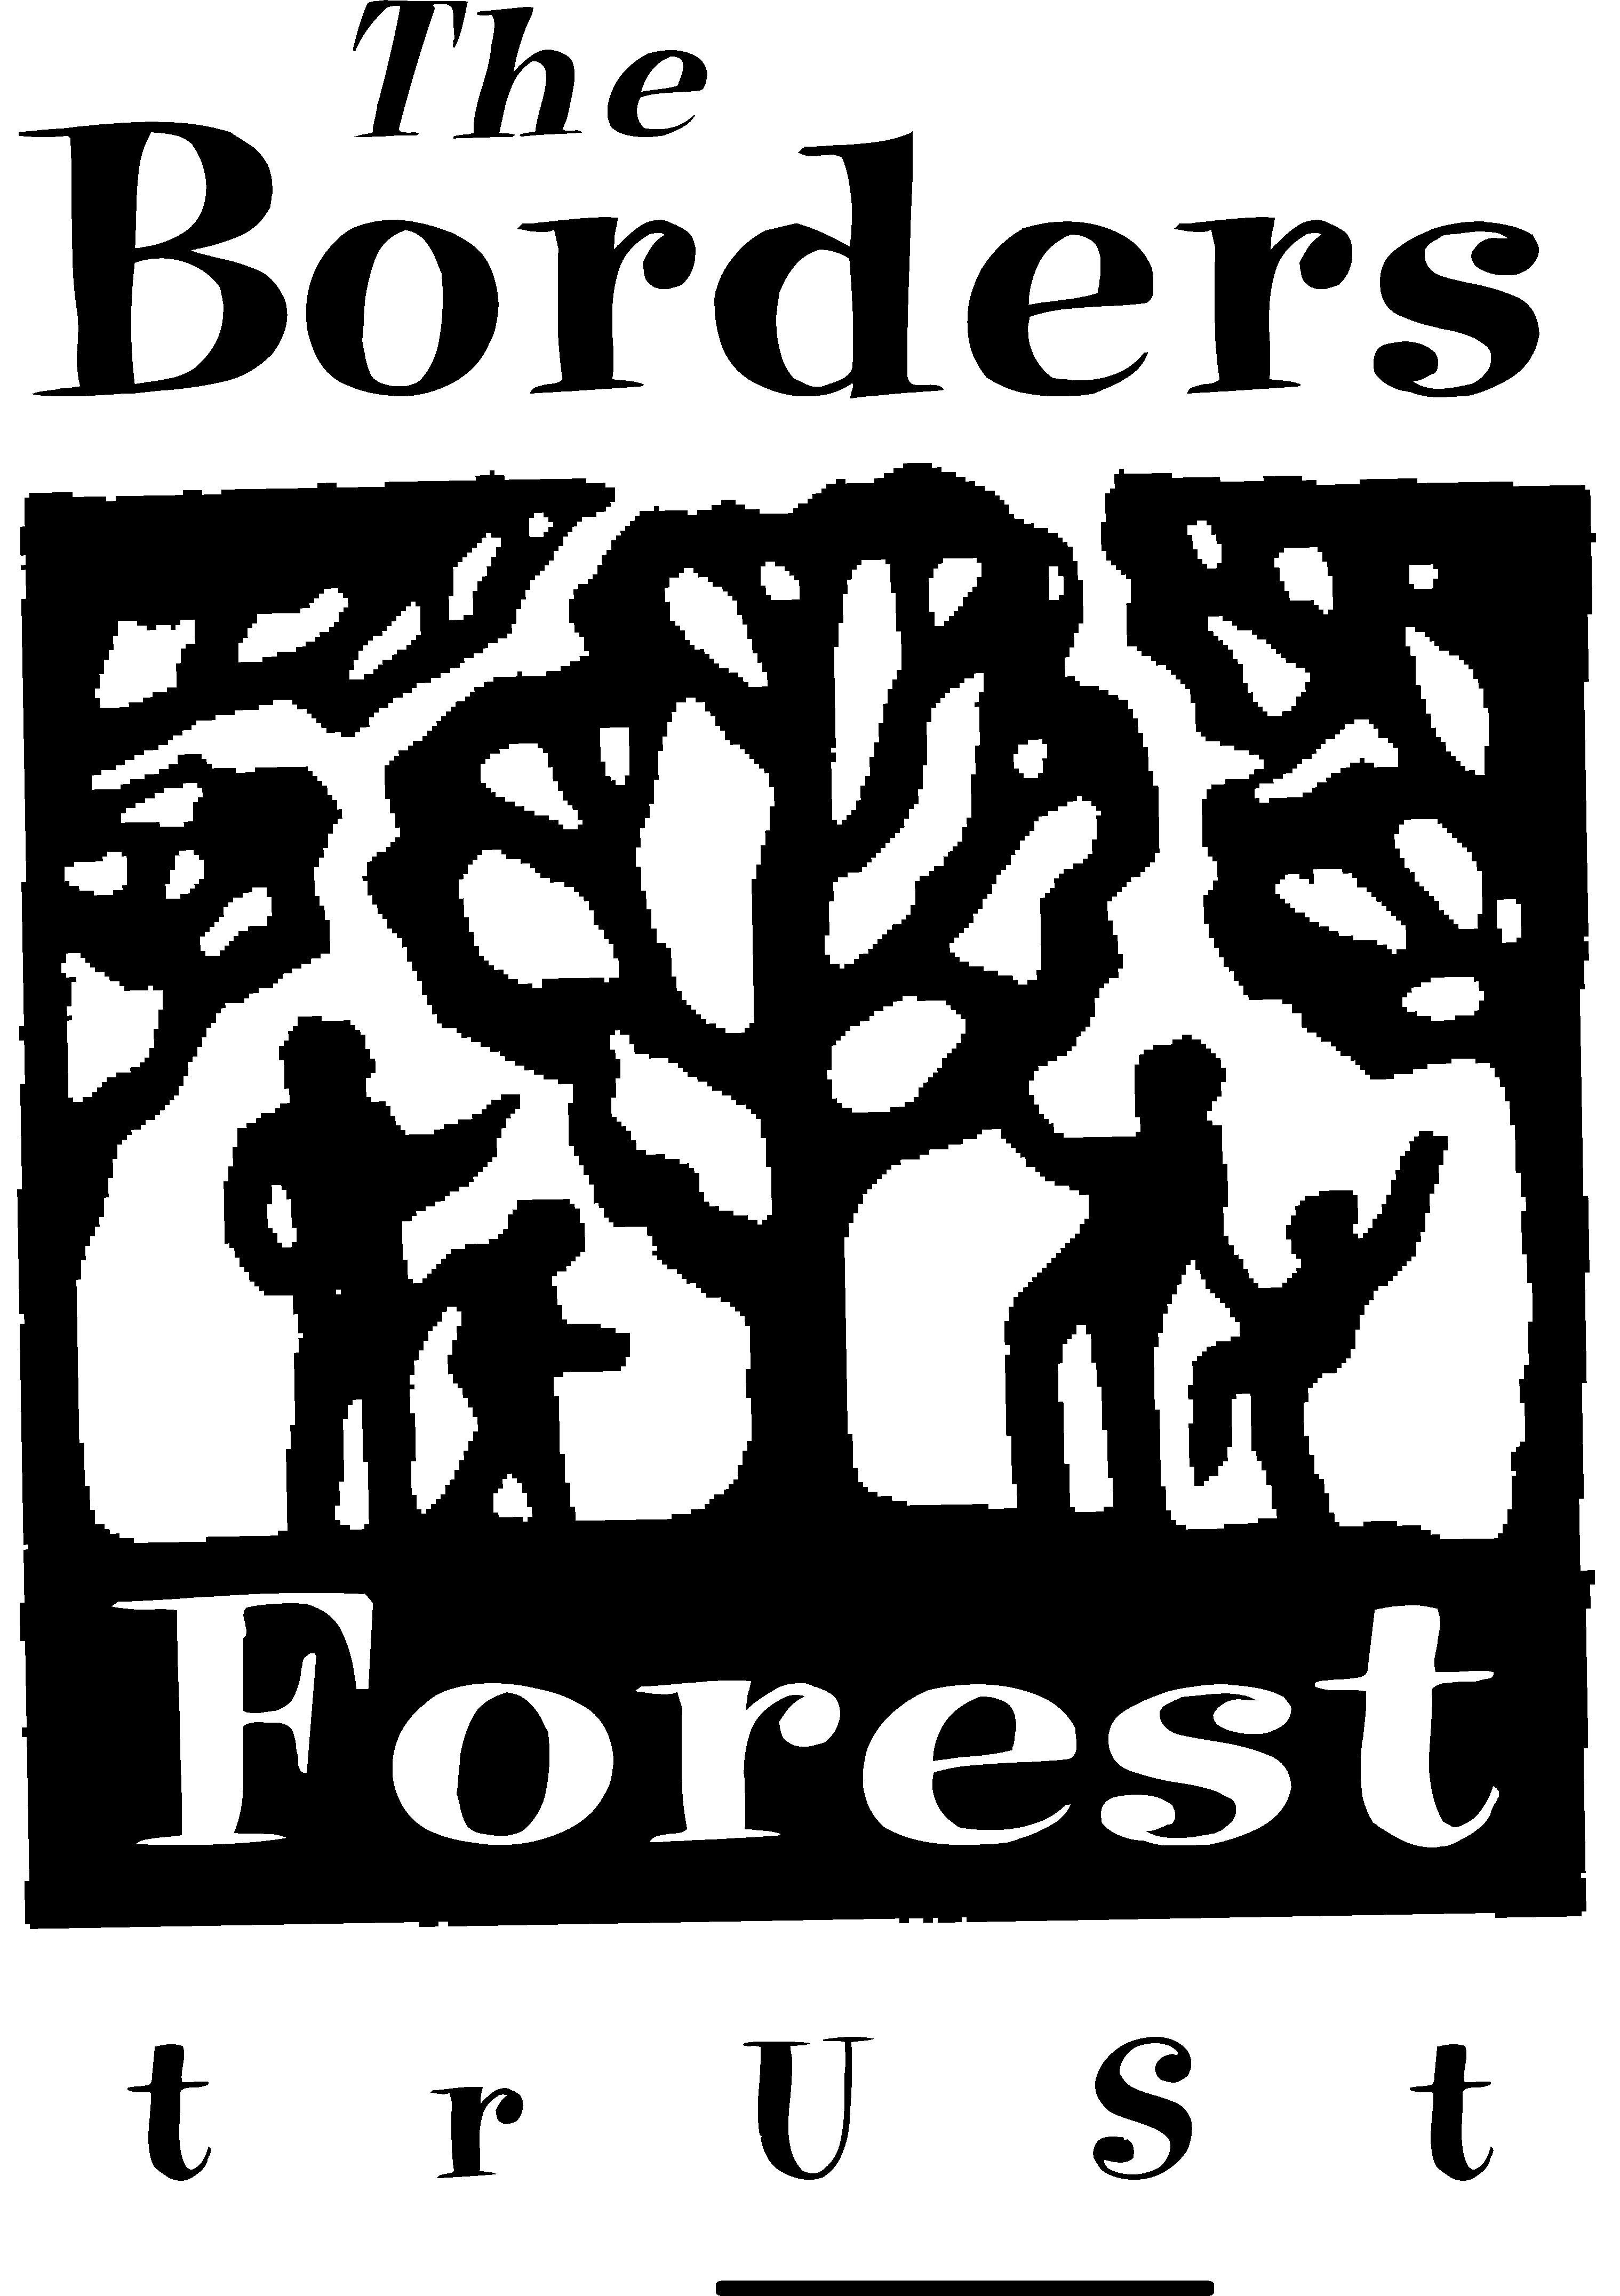 Borders Forest Trust